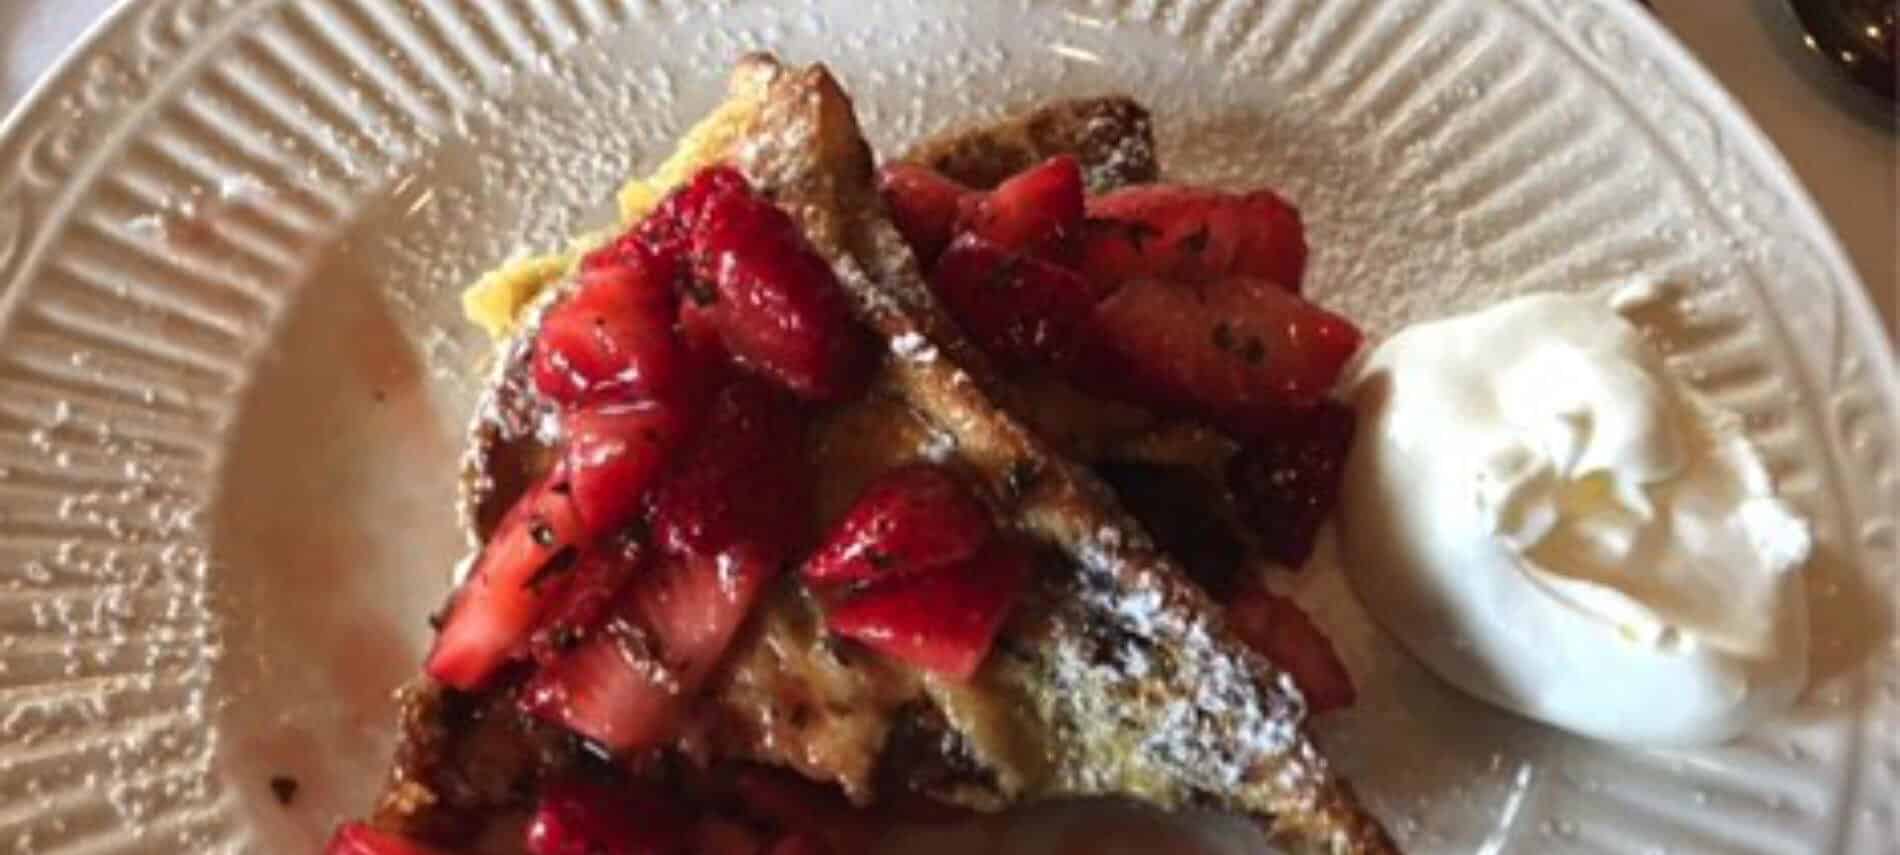 Red strawberries with french toast and a dollop of better on the side